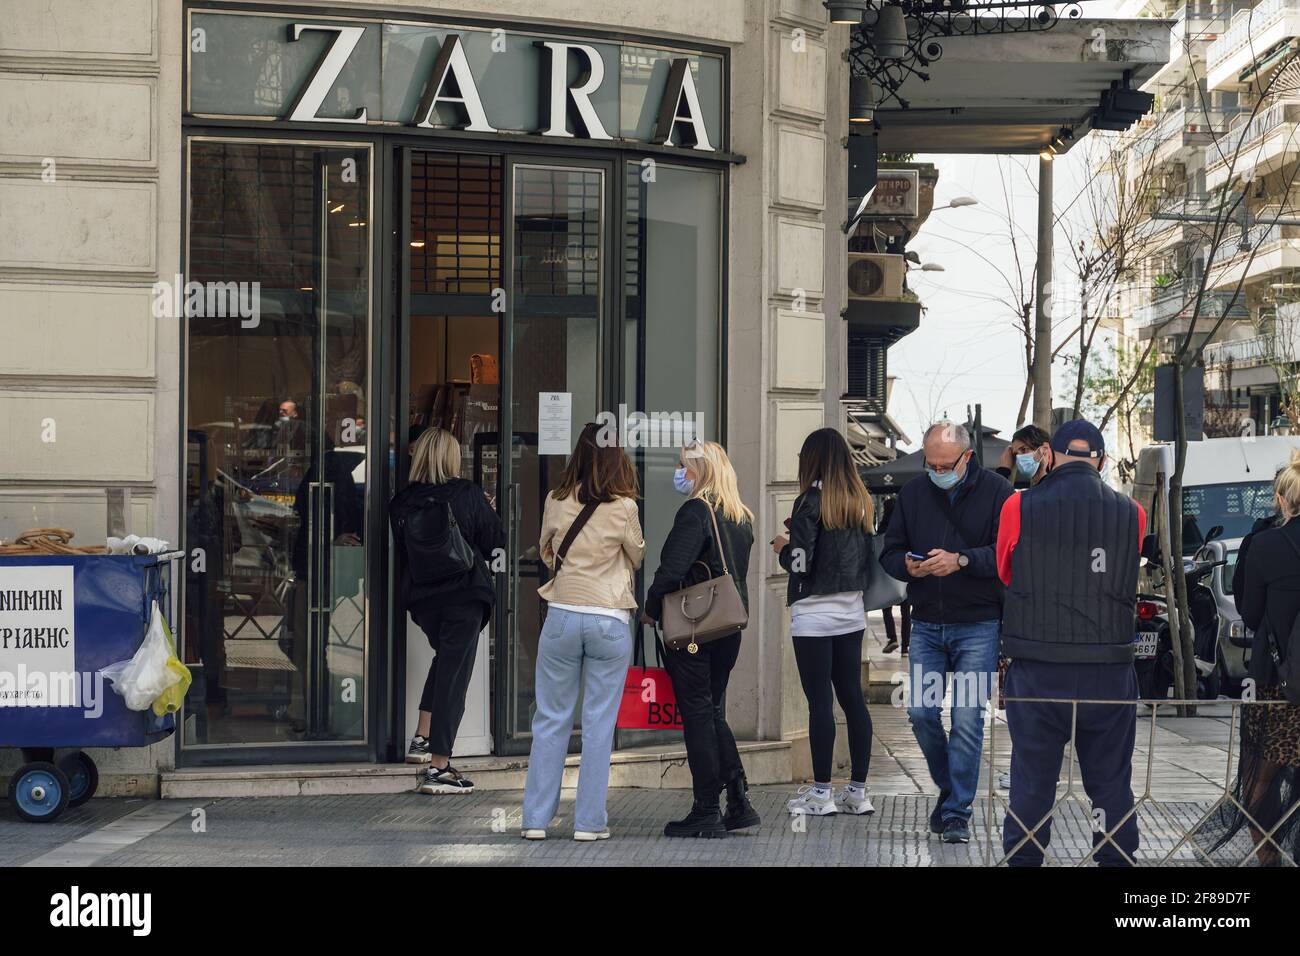 Zara Store Entrance High Resolution Stock Photography and Images - Alamy